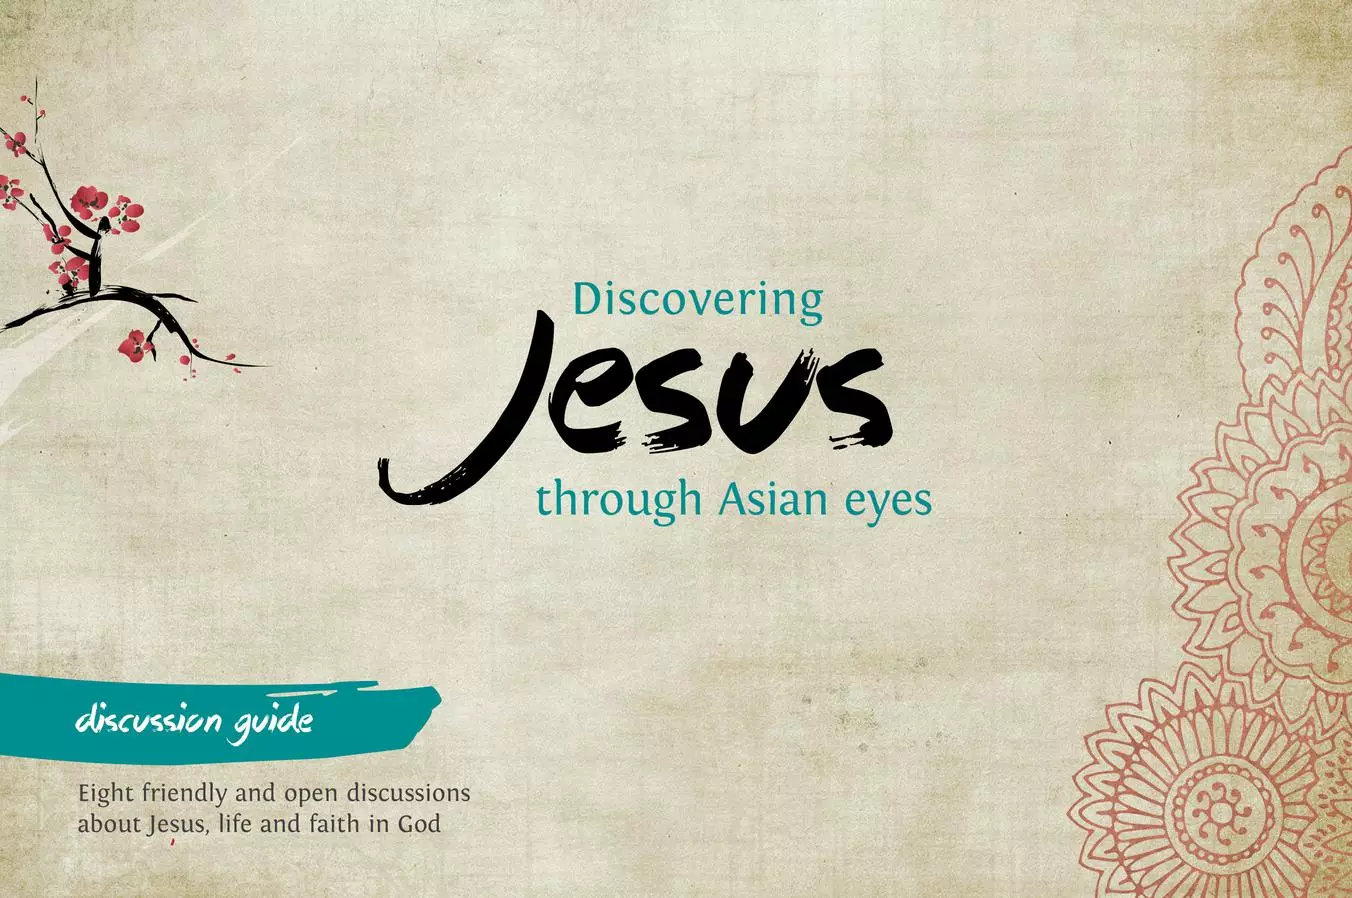 Discovering Jesus through Asian eyes - Discussion Guide